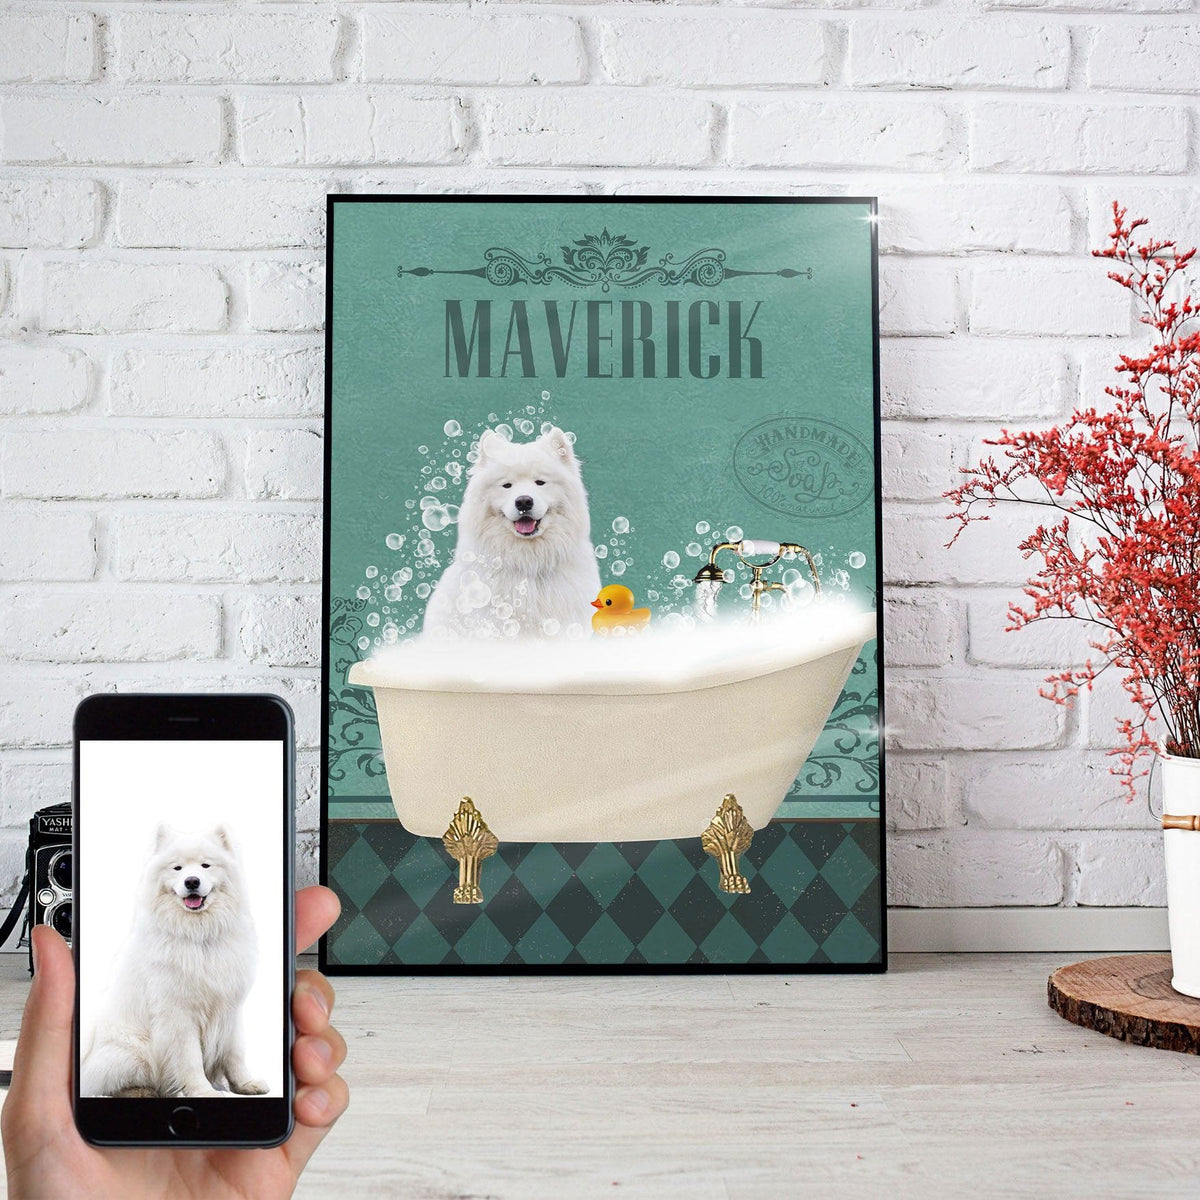 USA MADE Dog In Bathtub Personalized Pet Poster Canvas Print | Personalized Dog Cat Prints | Magazine Covers | Custom Pet Portrait from Photo | Personalized Gifts for Dog Mom or Dad, Pet Memorial Gift